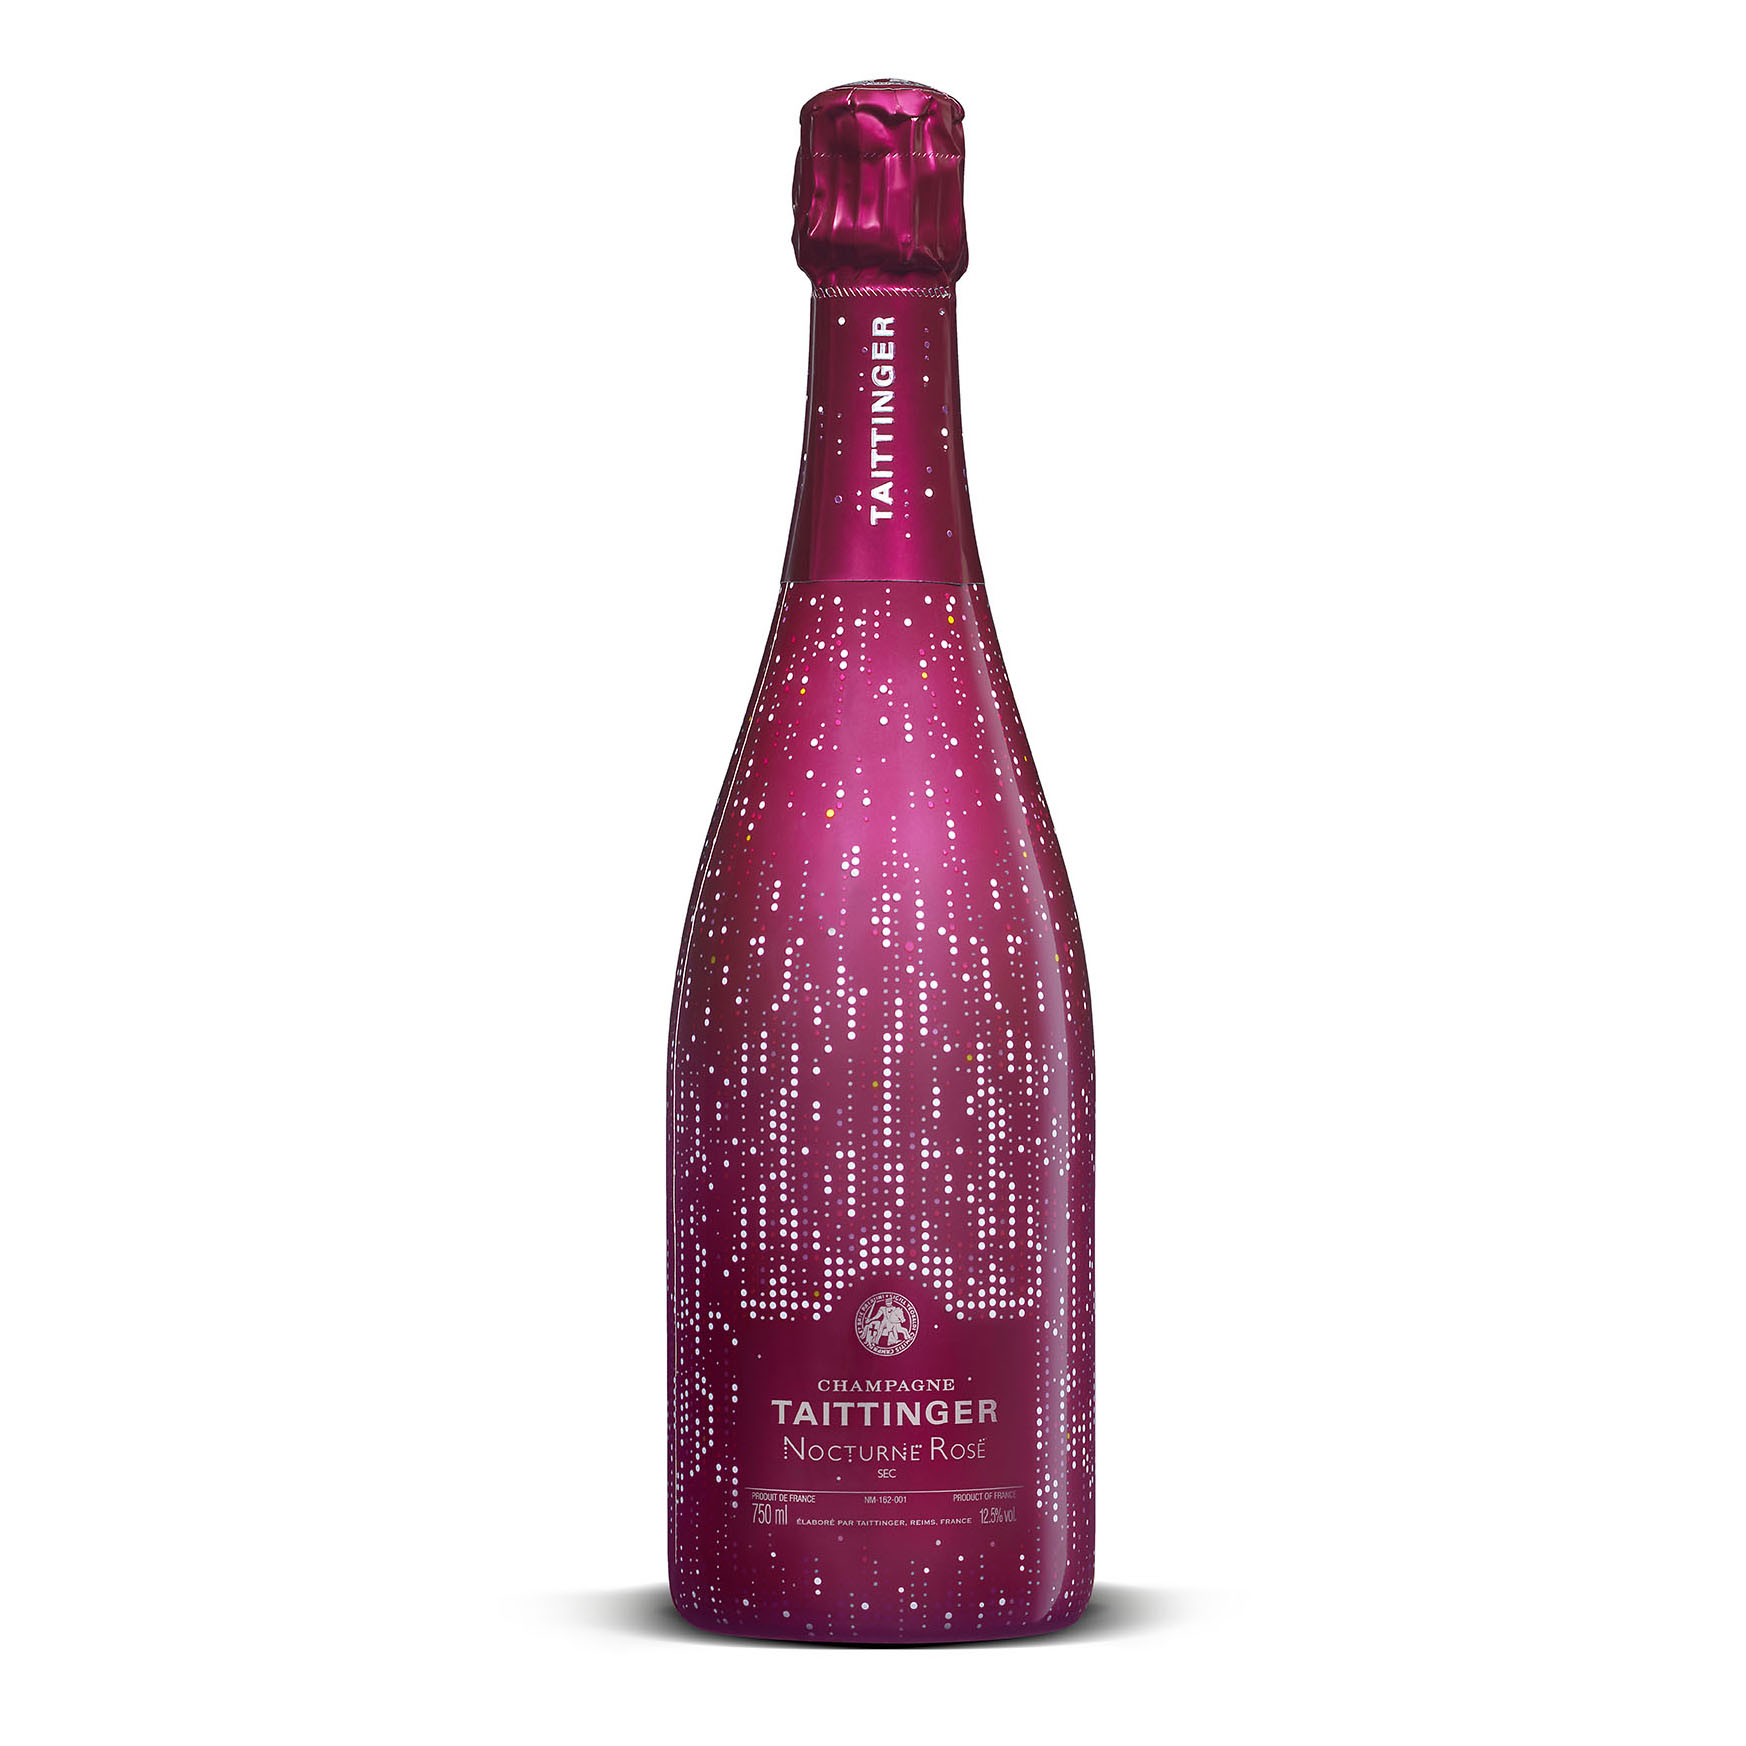 Taittinger Nocturne Rose City Lights Edition Champagne 75cl Great Price and Home Delivery